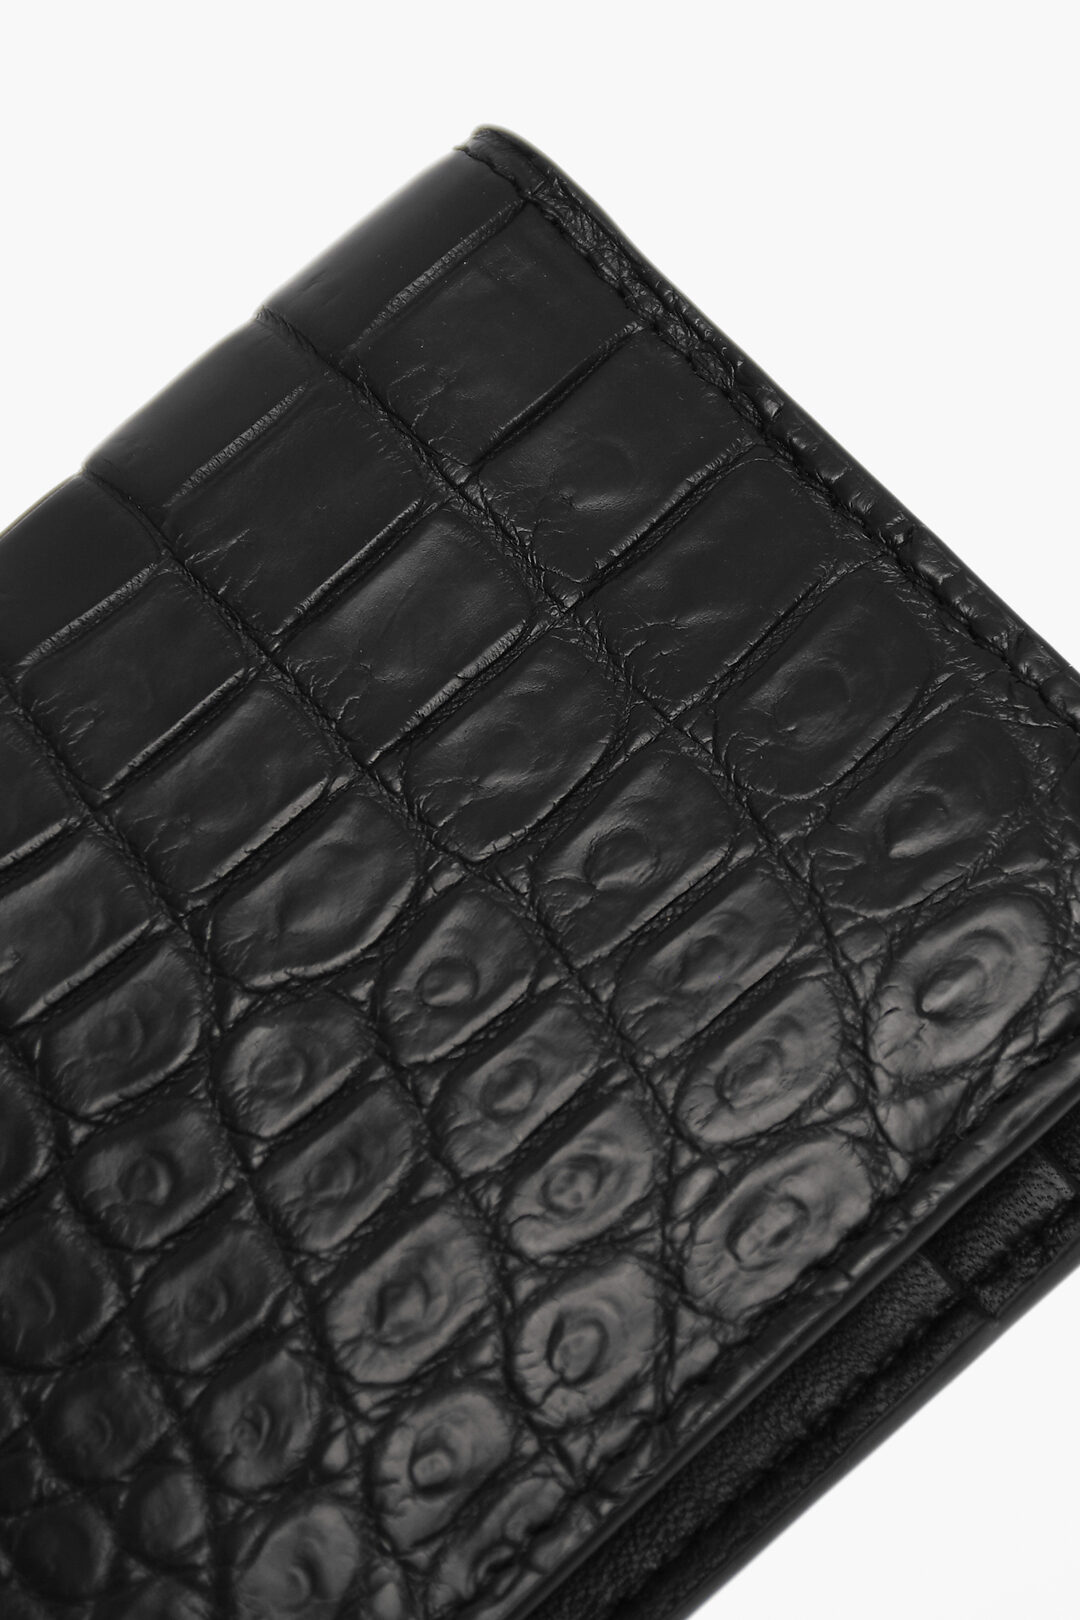 Flat Card Case with Zip, Black Croc, Card Holders